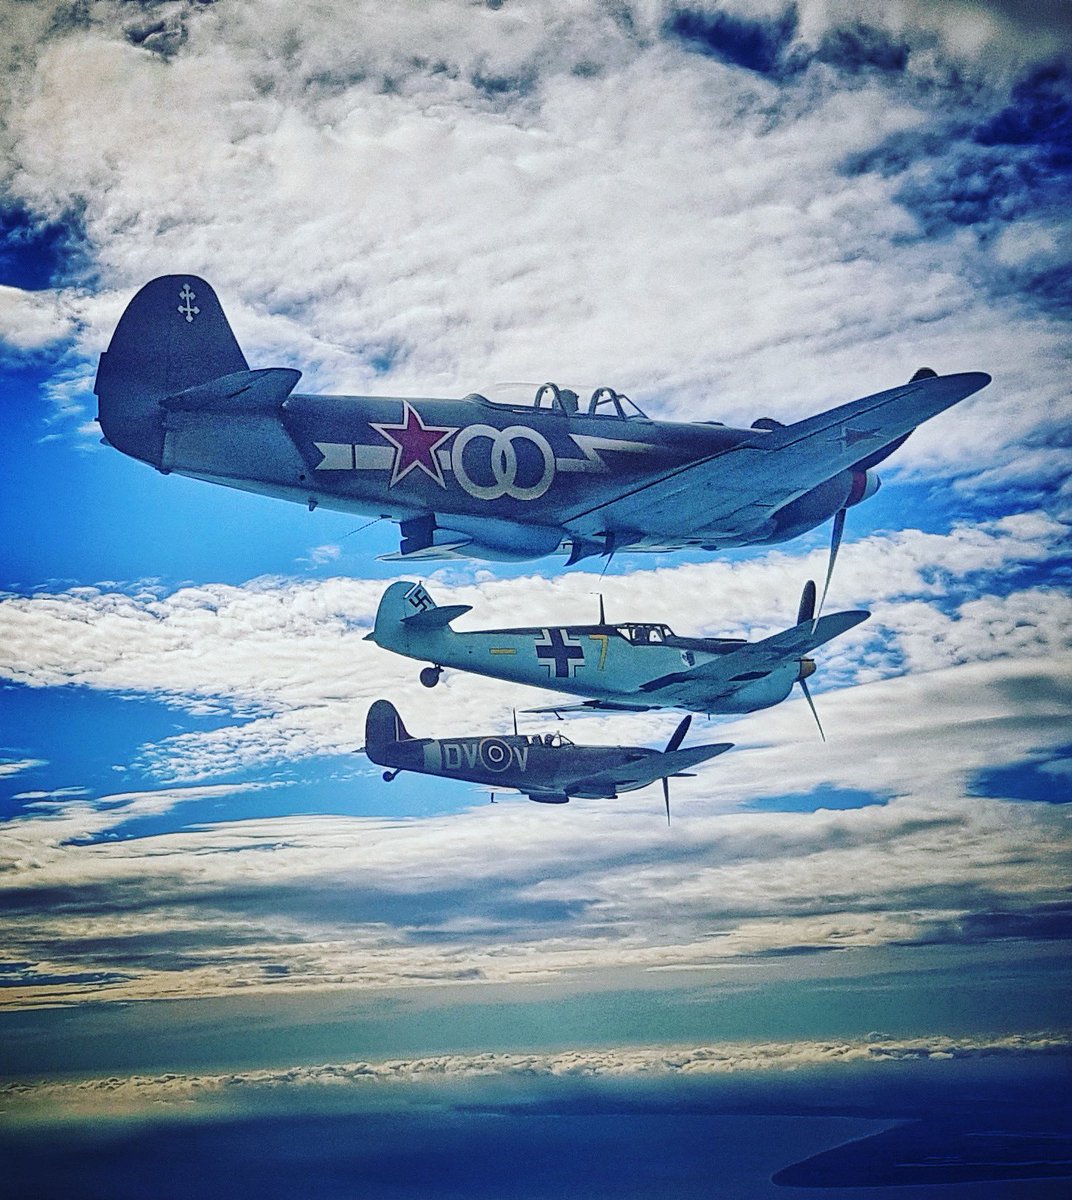 Not a formation you see every day! Taken during a transit back from France a few years ago. The closest two aeroplanes have since been sold through TASC Vintage
.

#yakovlev #spitfire #warbirds #warbirdpilots #buchon #air2air #avphoto #formationflying #warbirdsales #aircraftsales